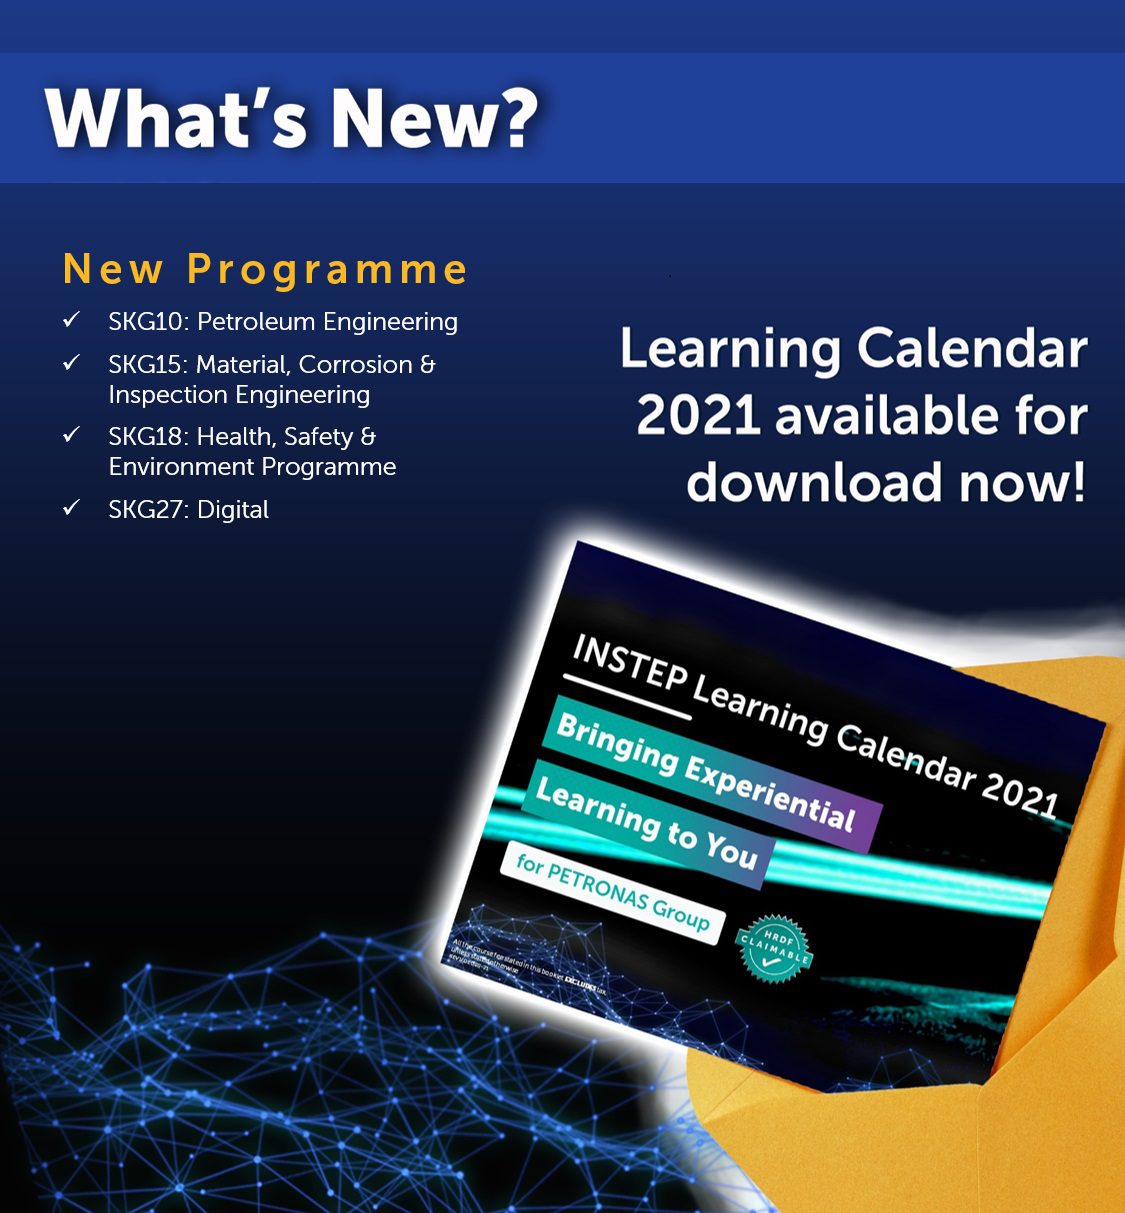 Latest INSTEP Learning Calendar 2021 (Revision 3) is here!